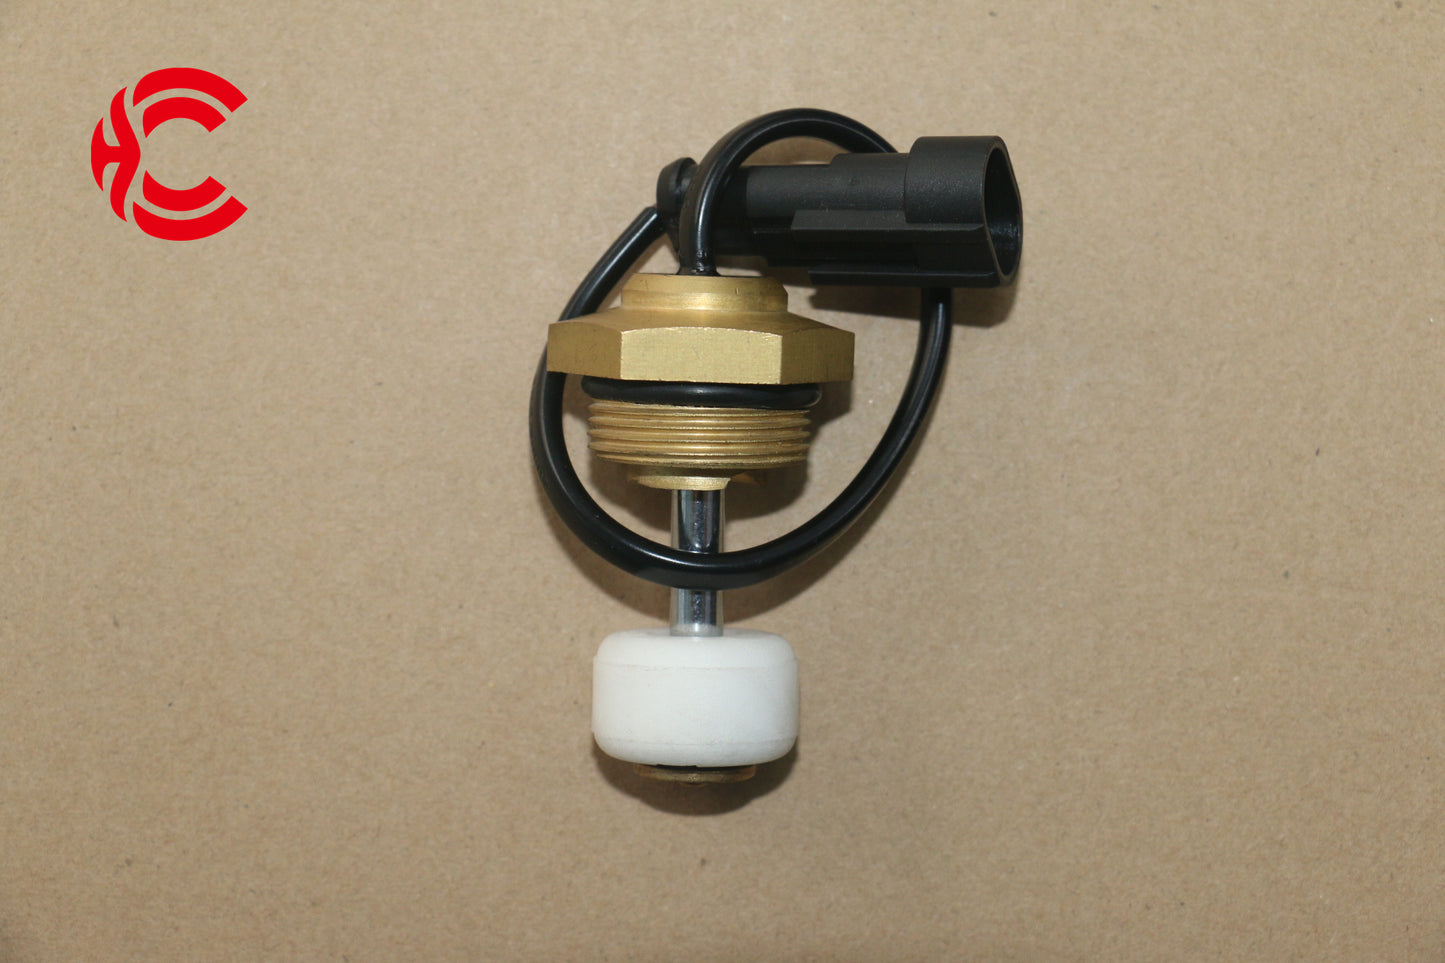 OEM: ZHONGTONG NEW ENERGYMaterial: ABS metalColor: Black GoldenOrigin: Made in ChinaWeight: 50gPacking List: 1* Coolant Level Alarm Sensor More ServiceWe can provide OEM Manufacturing serviceWe can Be your one-step solution for Auto PartsWe can provide technical scheme for you Feel Free to Contact Us, we will get back to you as soon as possible.